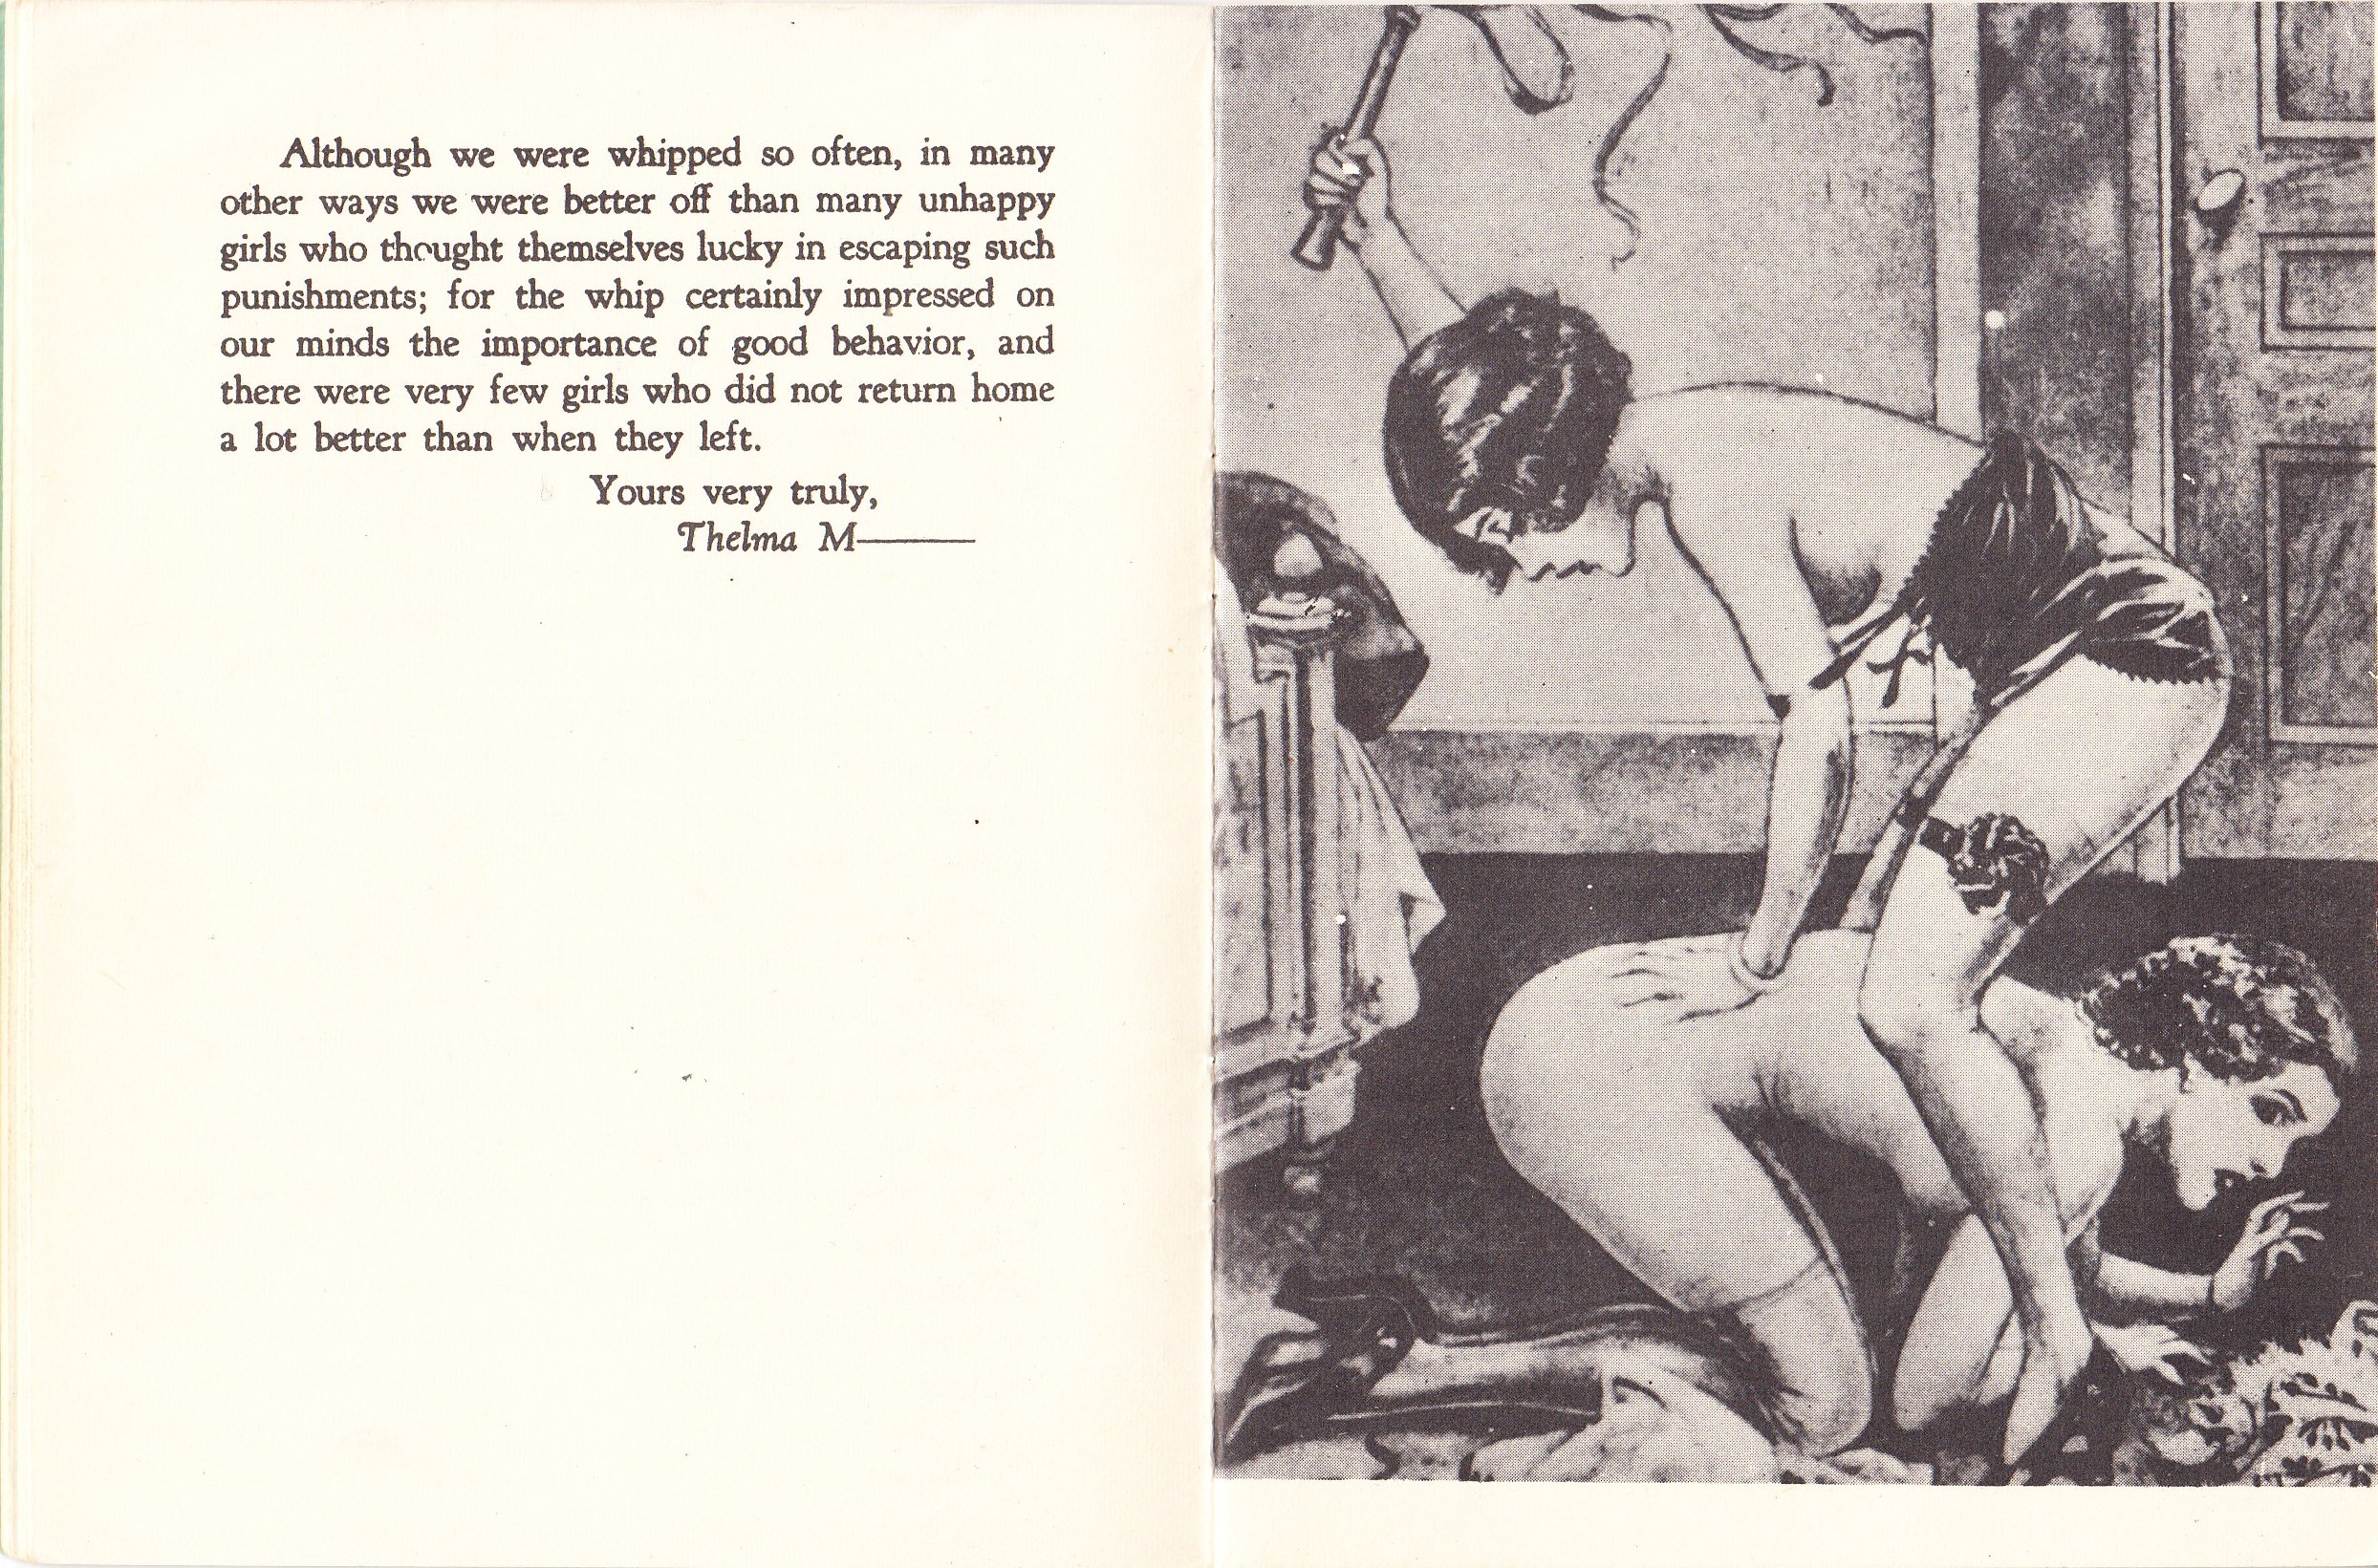 Chéri Hérouard, 'UNIQUE, For Lovers of the Unusual' Spanking Illustrations_12.jpg